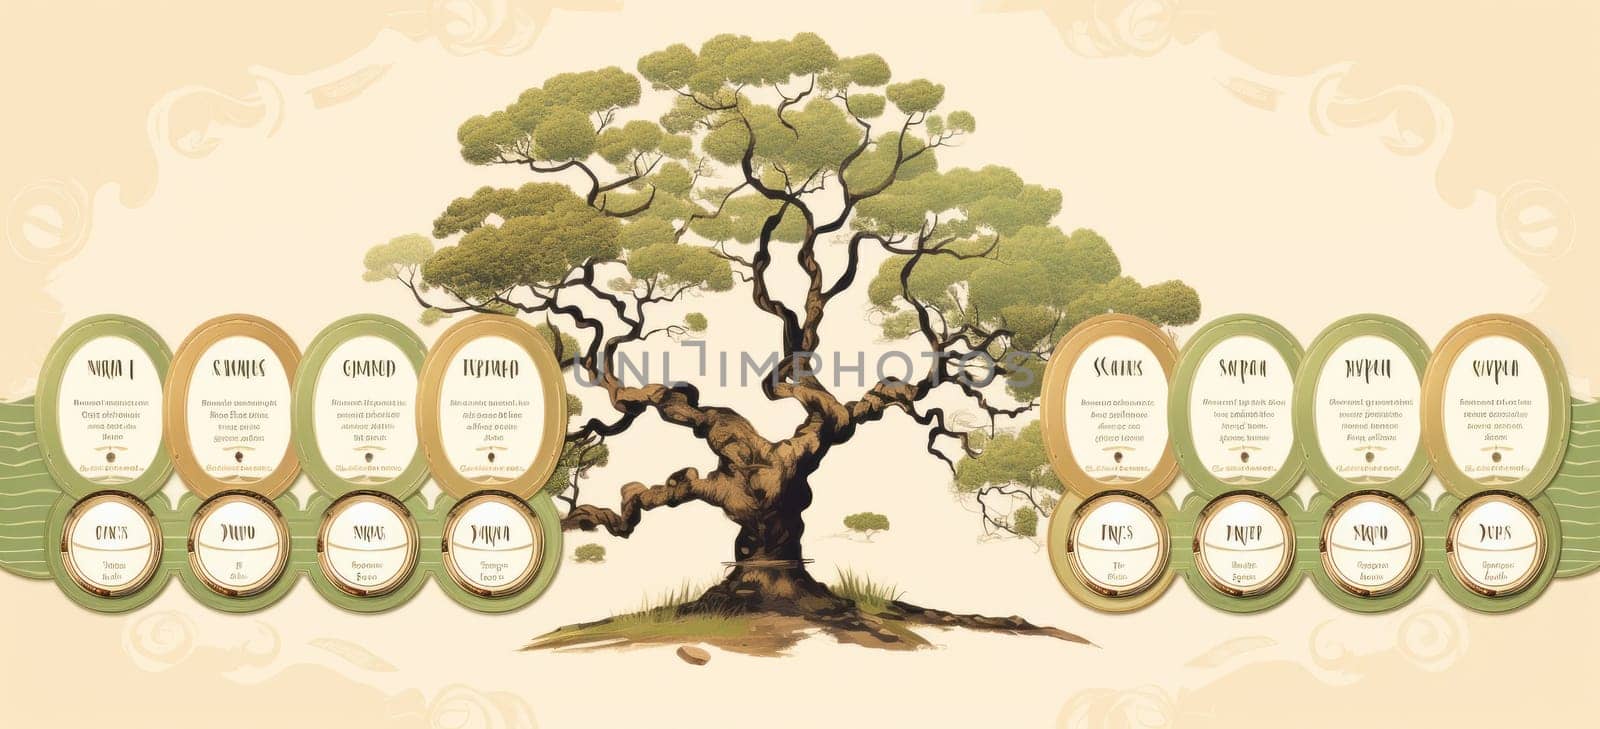 Eye-catching greeting card template with family tree by Yurich32